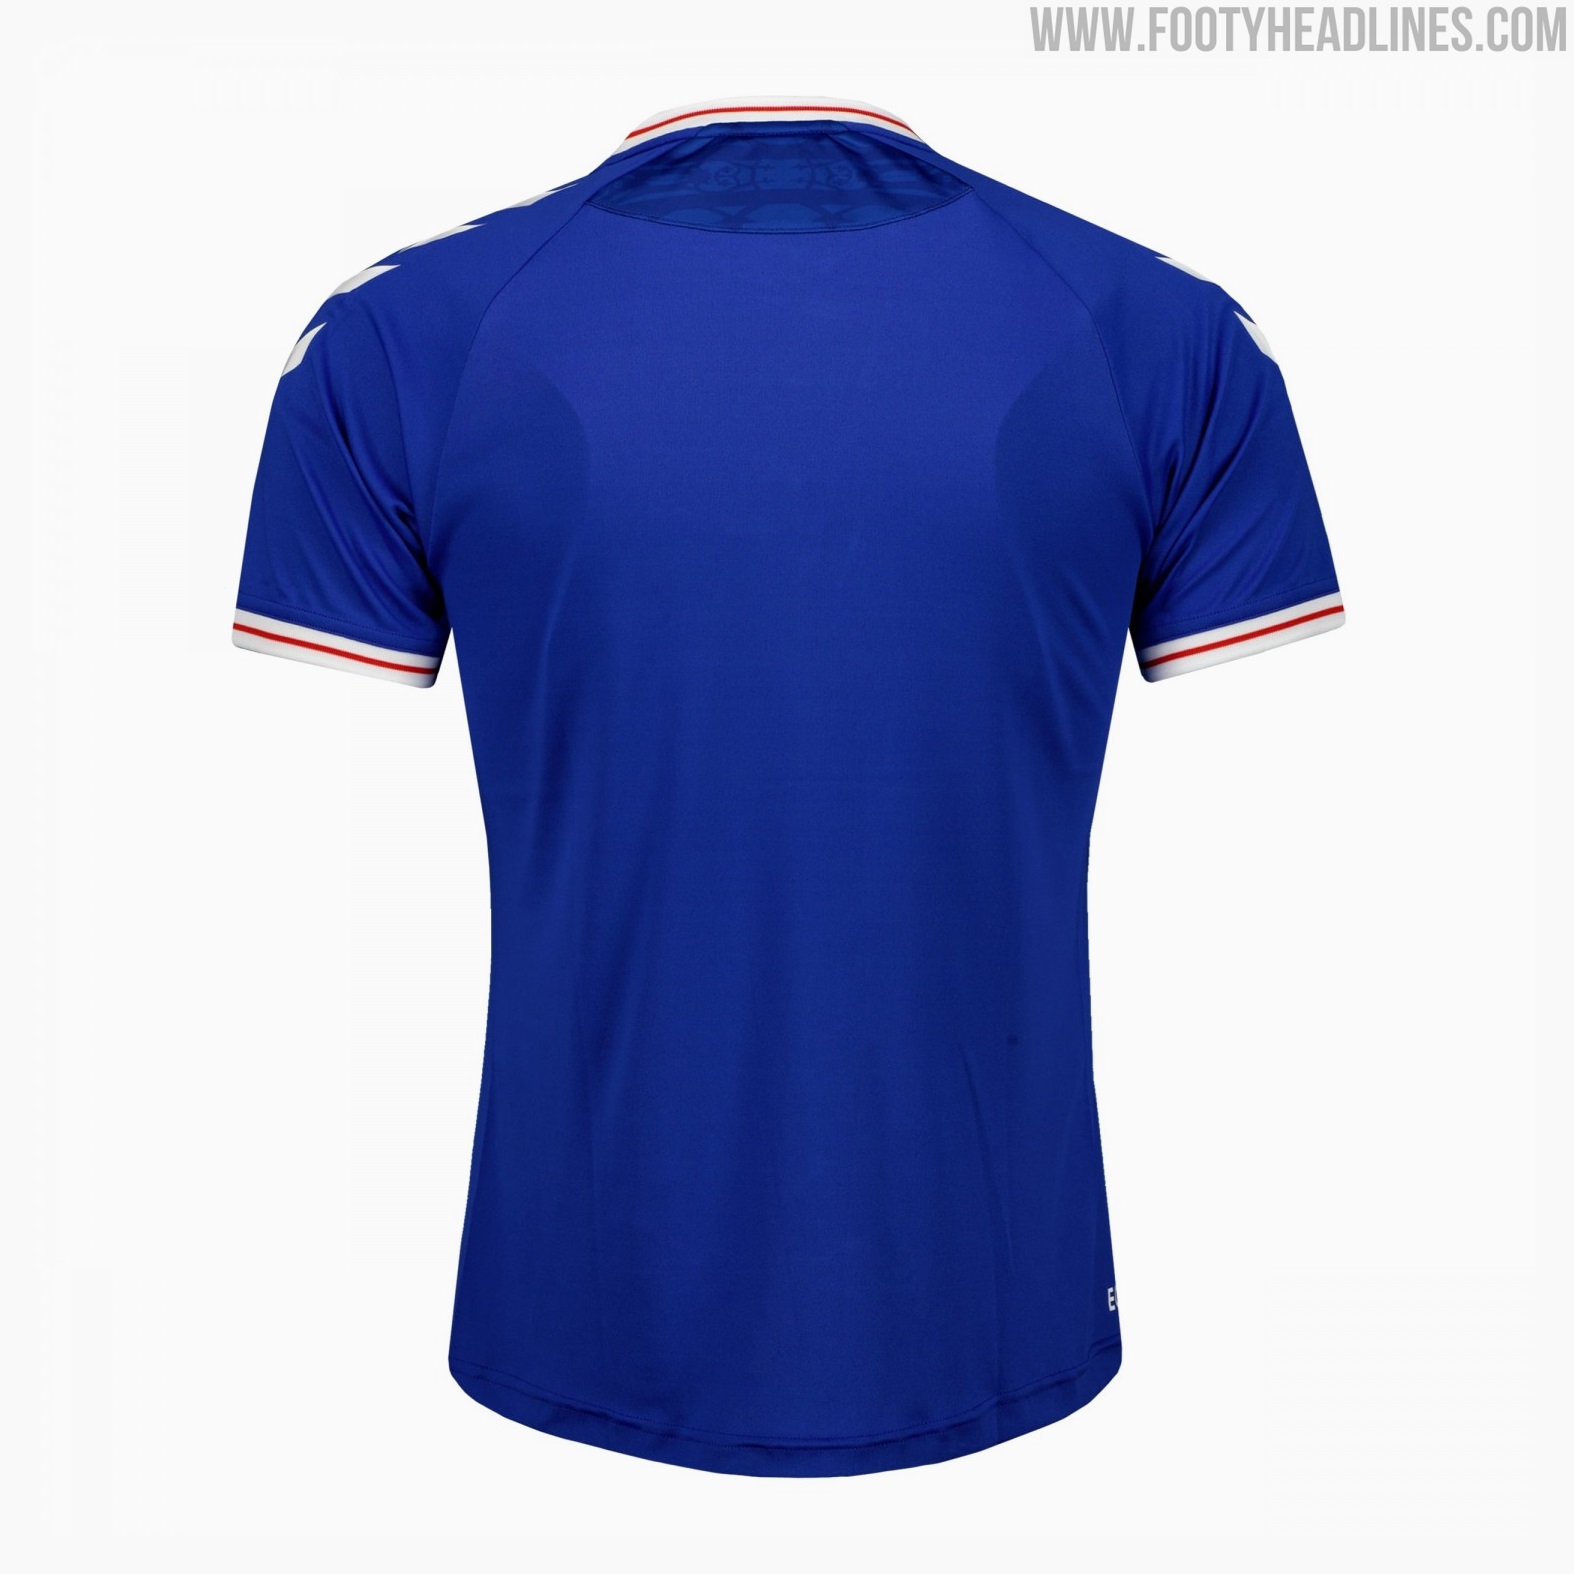 Oldham Athletic 21-22 Home Kit + New Club Crest Unveiled - Footy Headlines